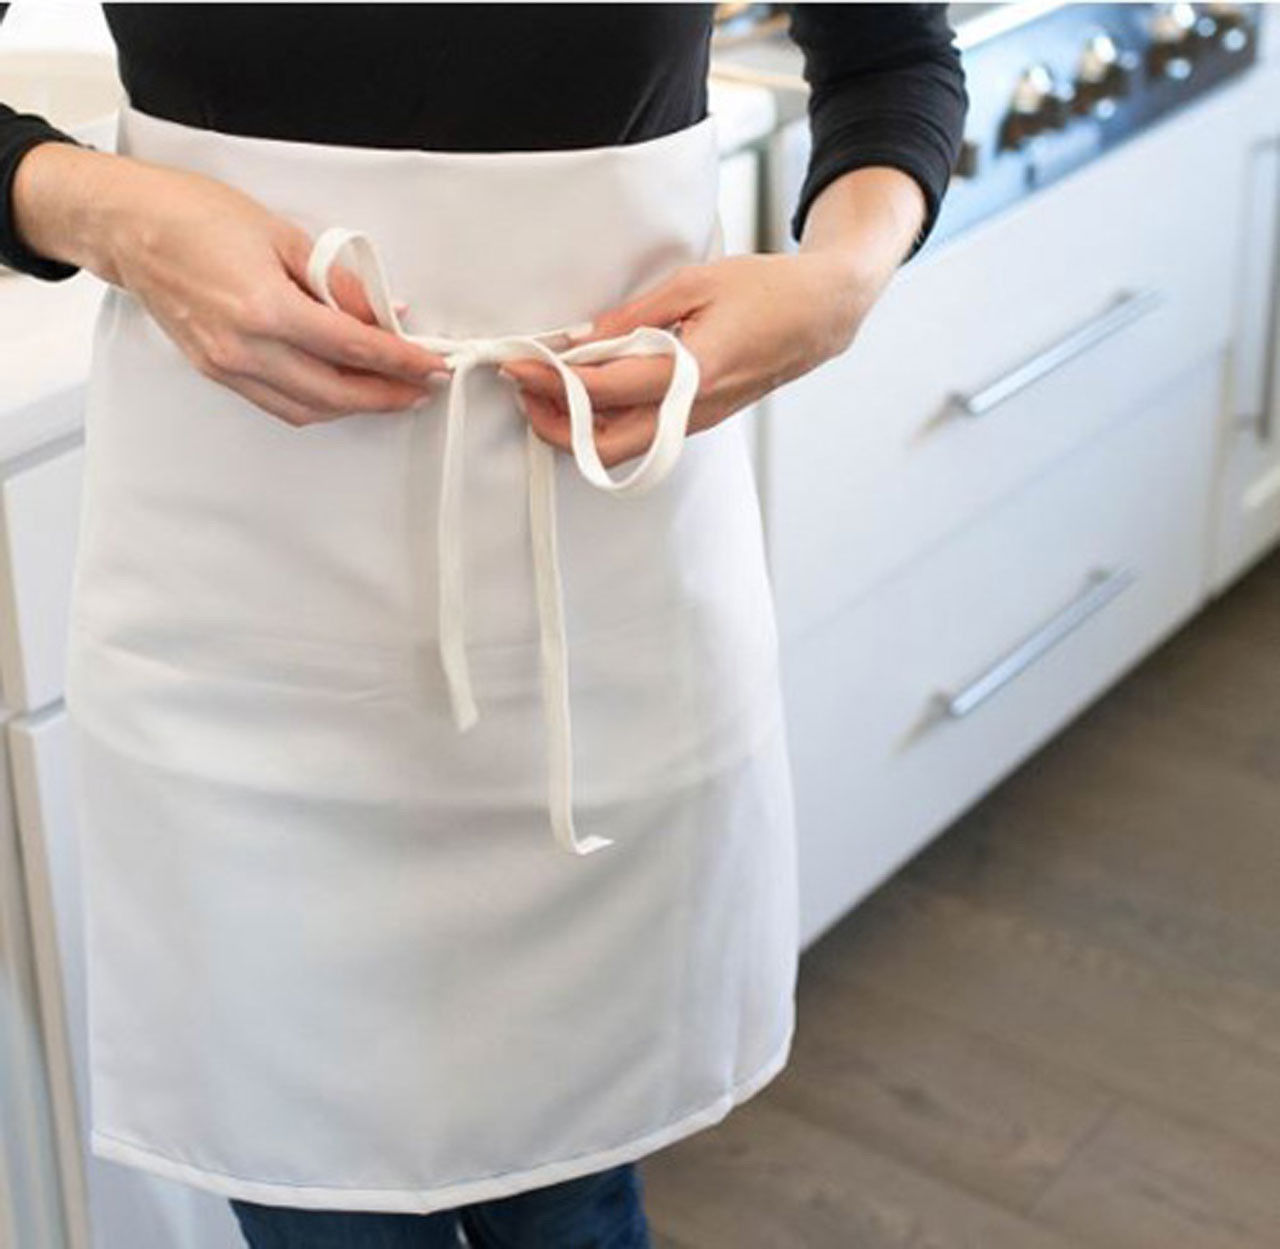 Can cooking aprons like the 4-Way, Reversible Apron be easily cleaned?